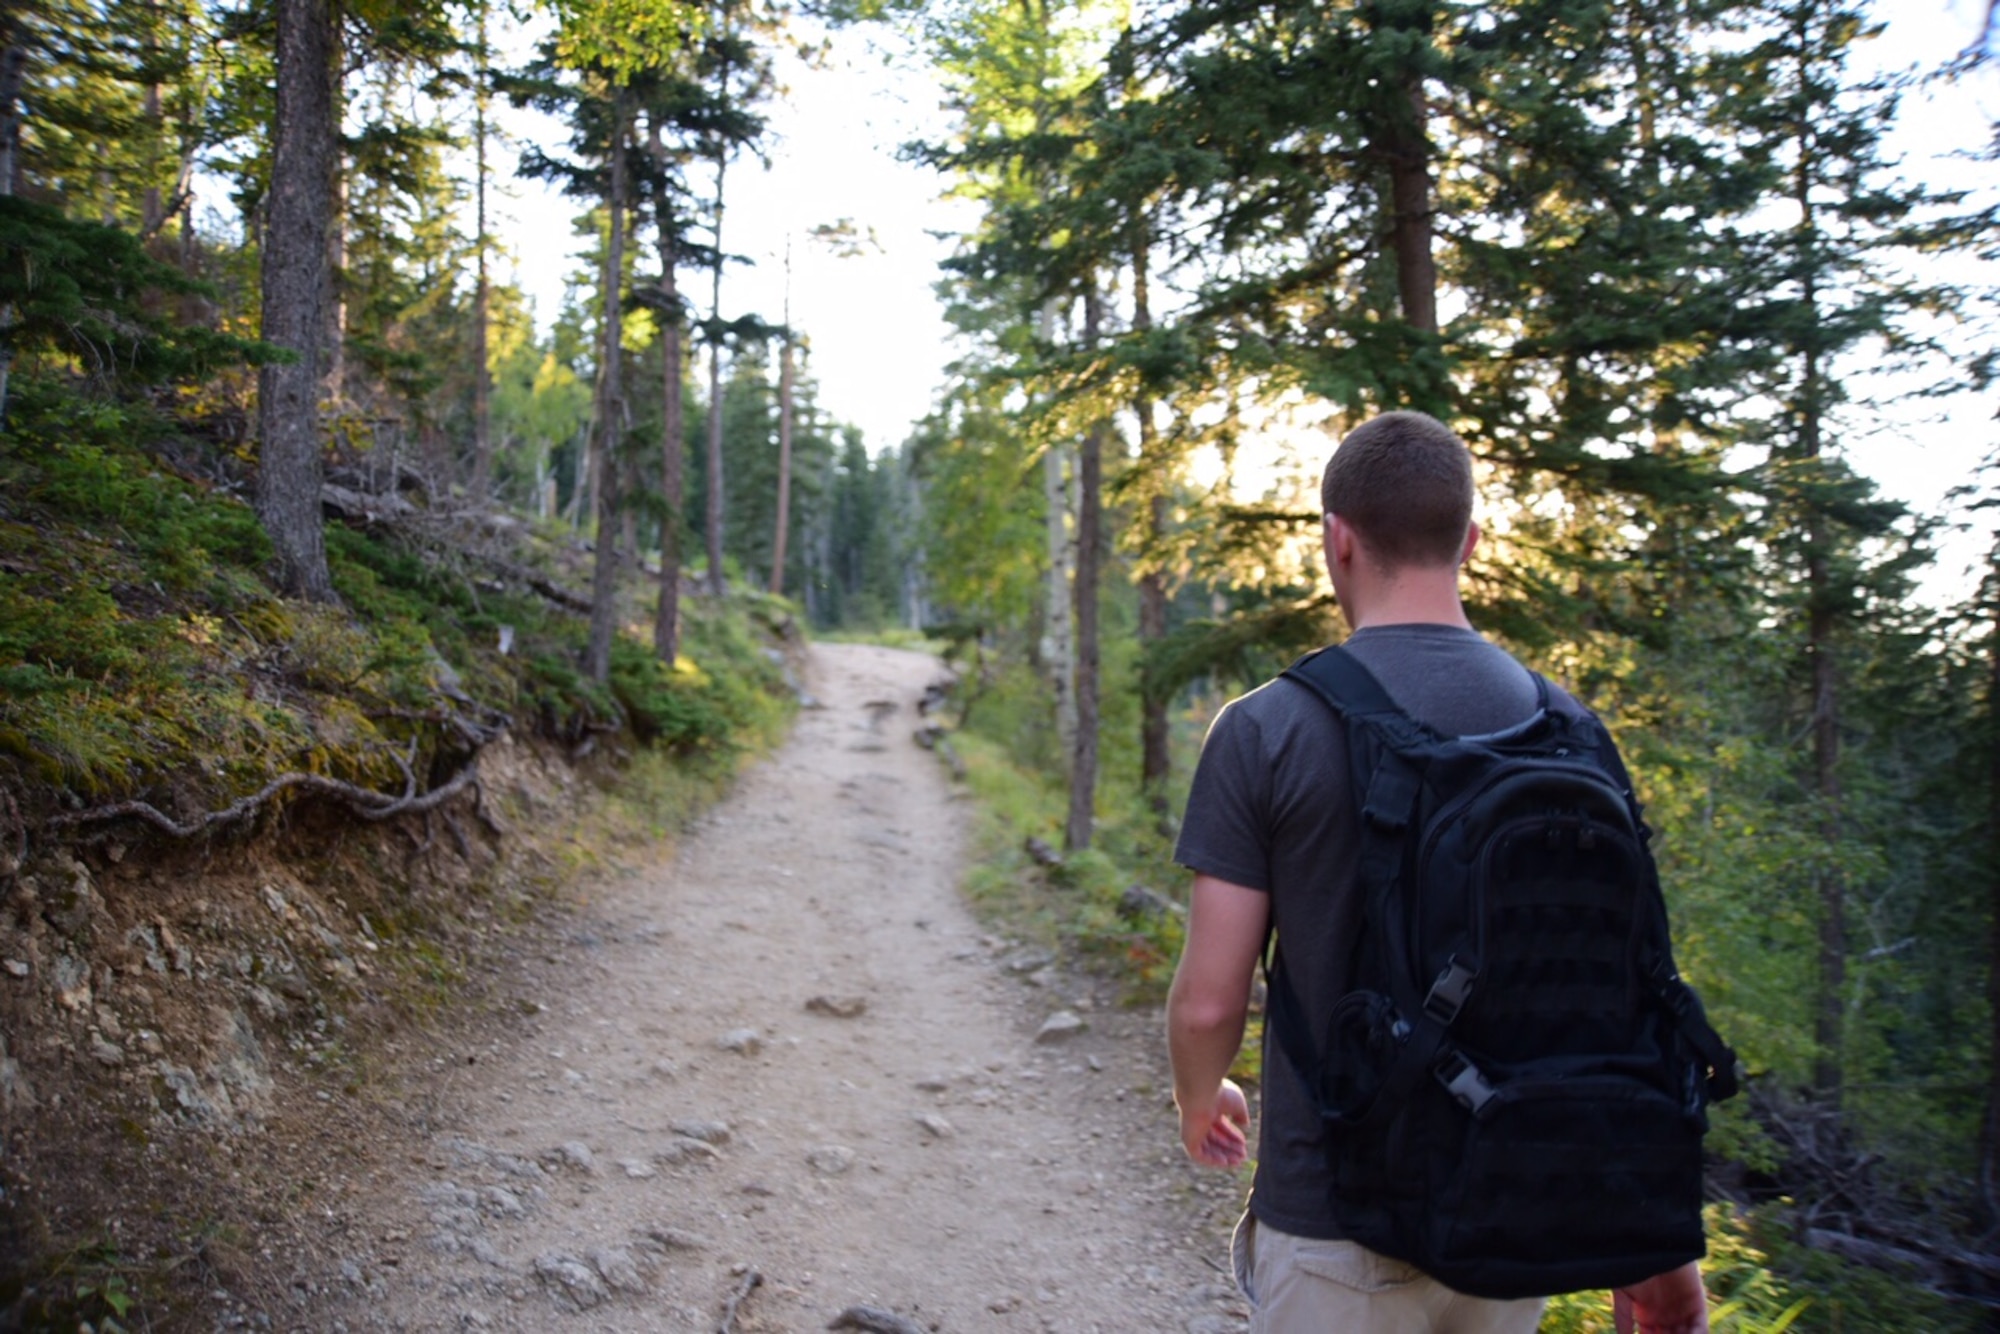 Airman 1st Class Matt Hinson, 28th Comptroller Squadron financial customer service technician, hikes down the No.4 Harney Peak trail in the Black Hills National Park, S.D., Sept. 12, 2015. Hinson uses hiking as a way to relax and recuperate from work and enjoy the outdoors before the winter arrives. (U.S. Air Force photo by Airman 1st Class James L. Miller/Released)